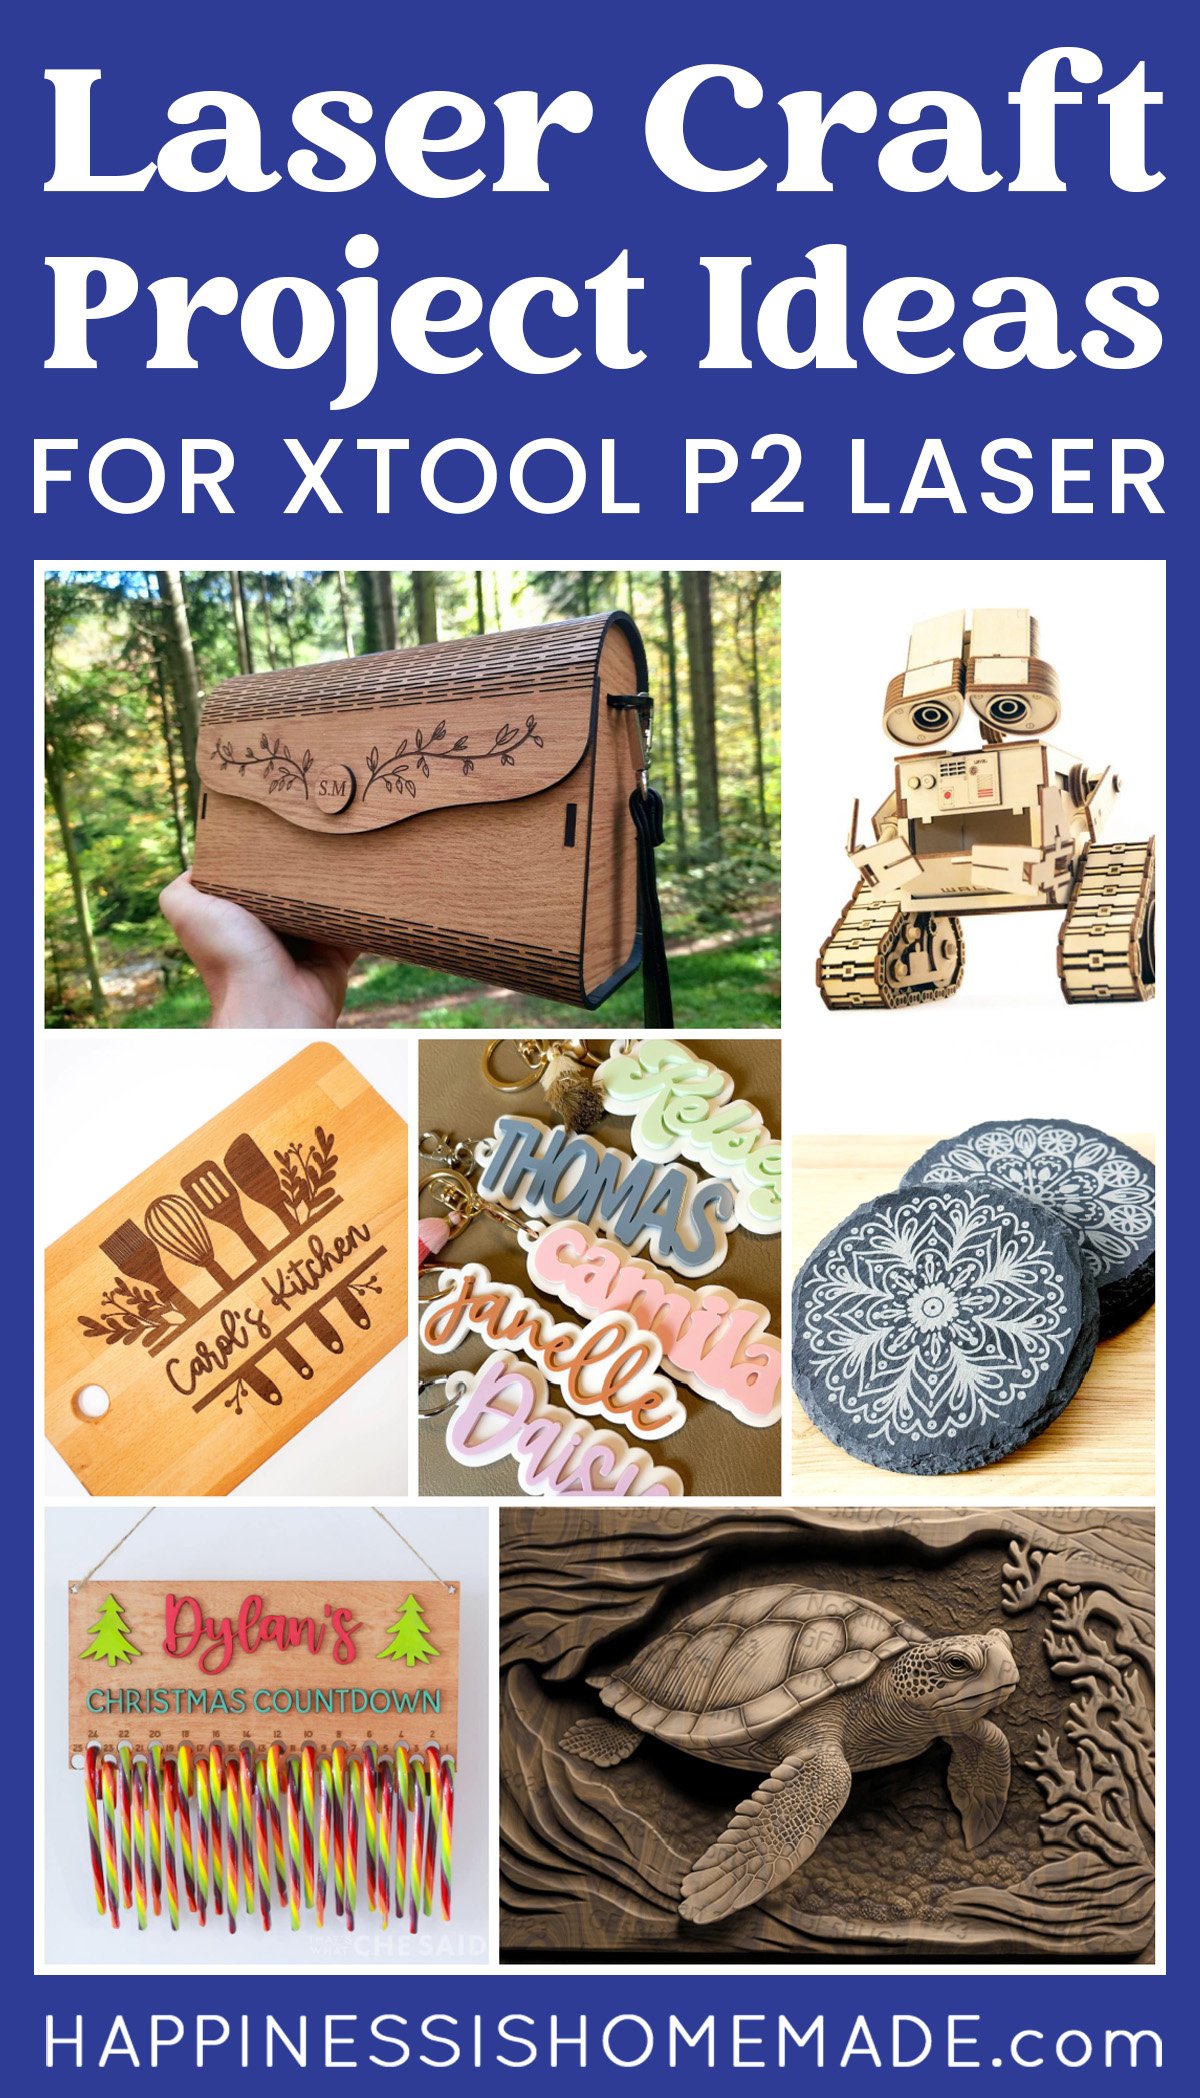 Collage of laser-created project ideas with "Laser Craft Project Ideas for xTool P2 Laser" text on pink background